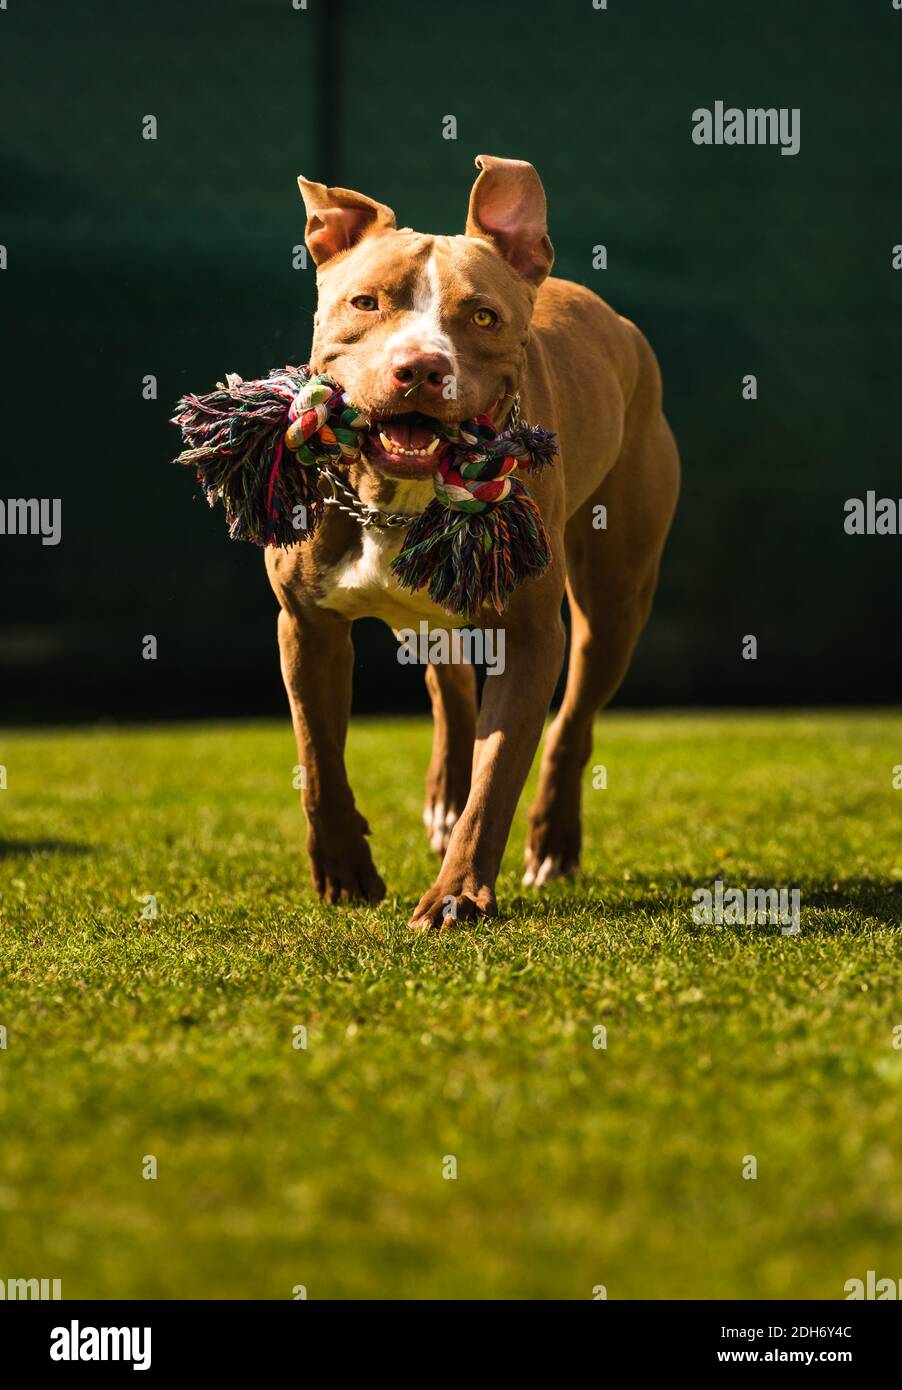 Dog running in backyard, amstaff terrier with toy rope runs towards camera. Stock Photo